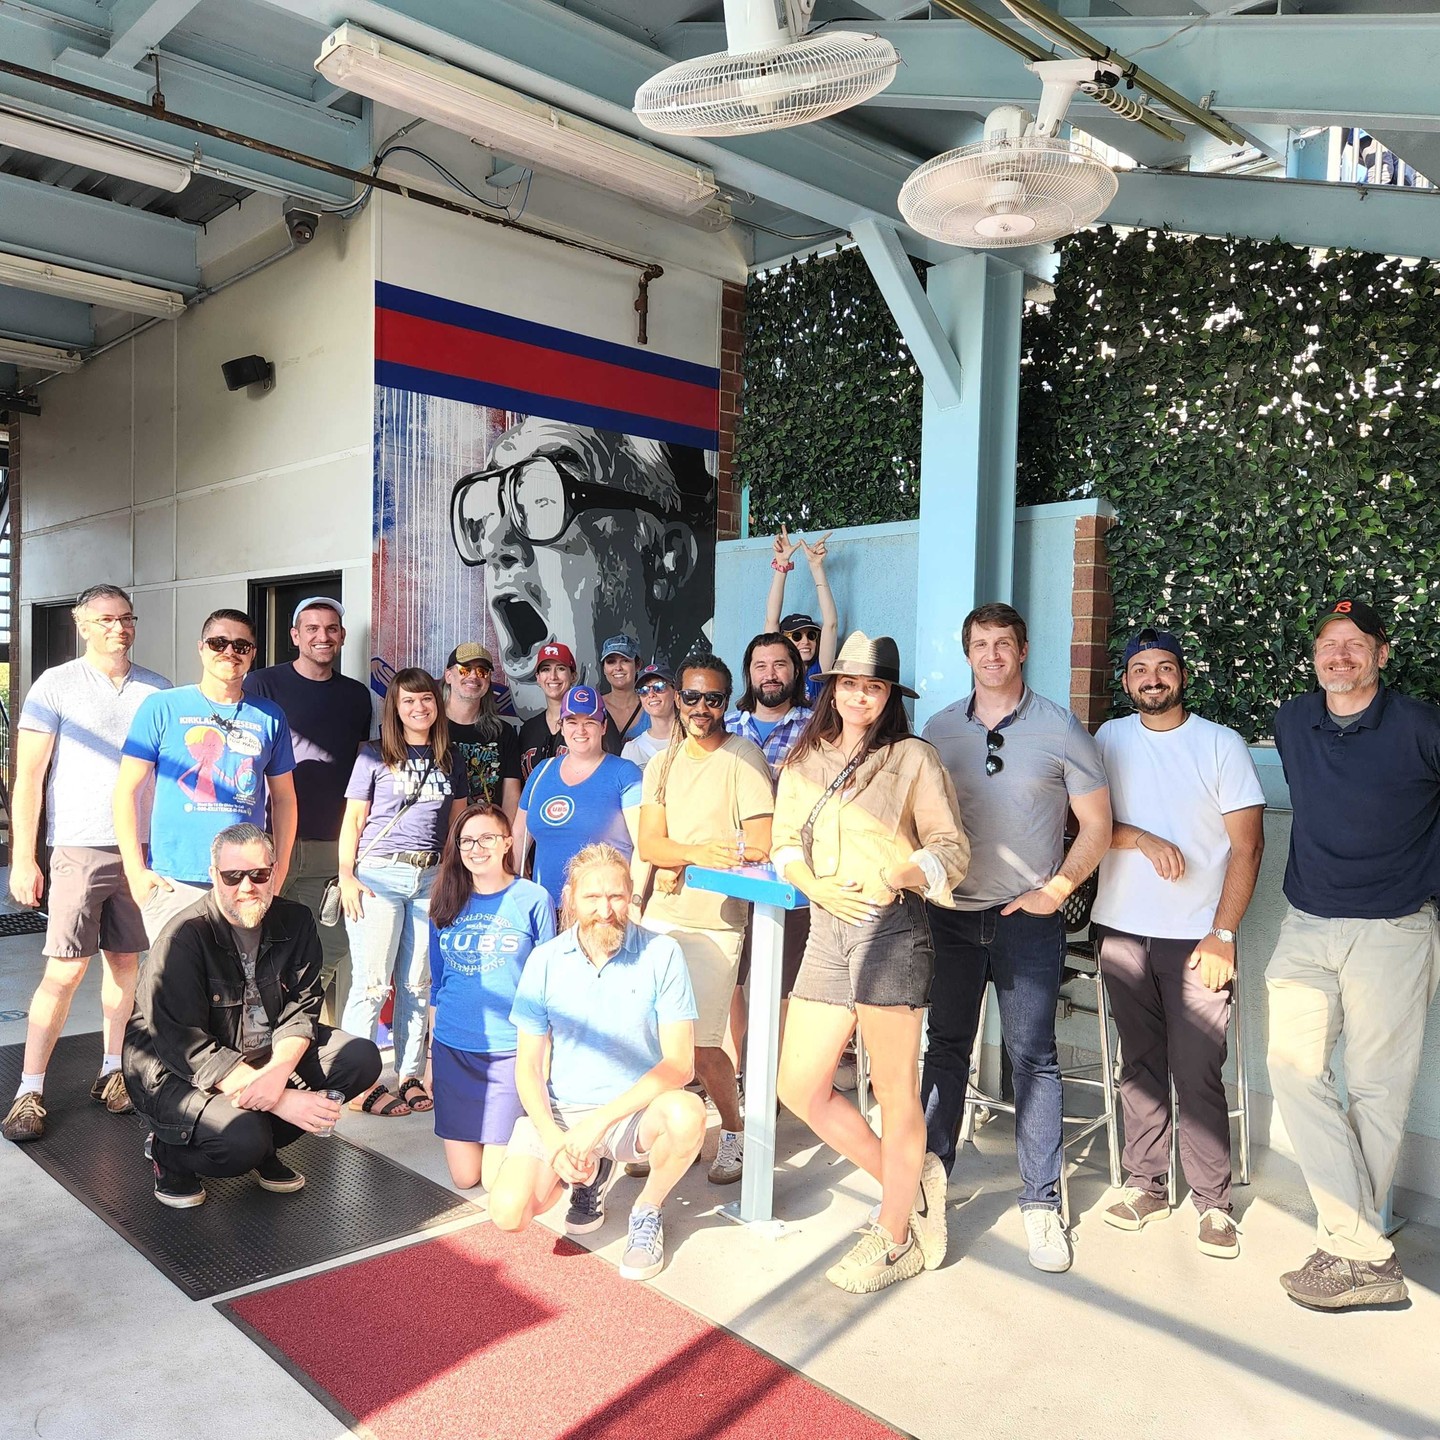 P/E staff at a Chicago Cubs game